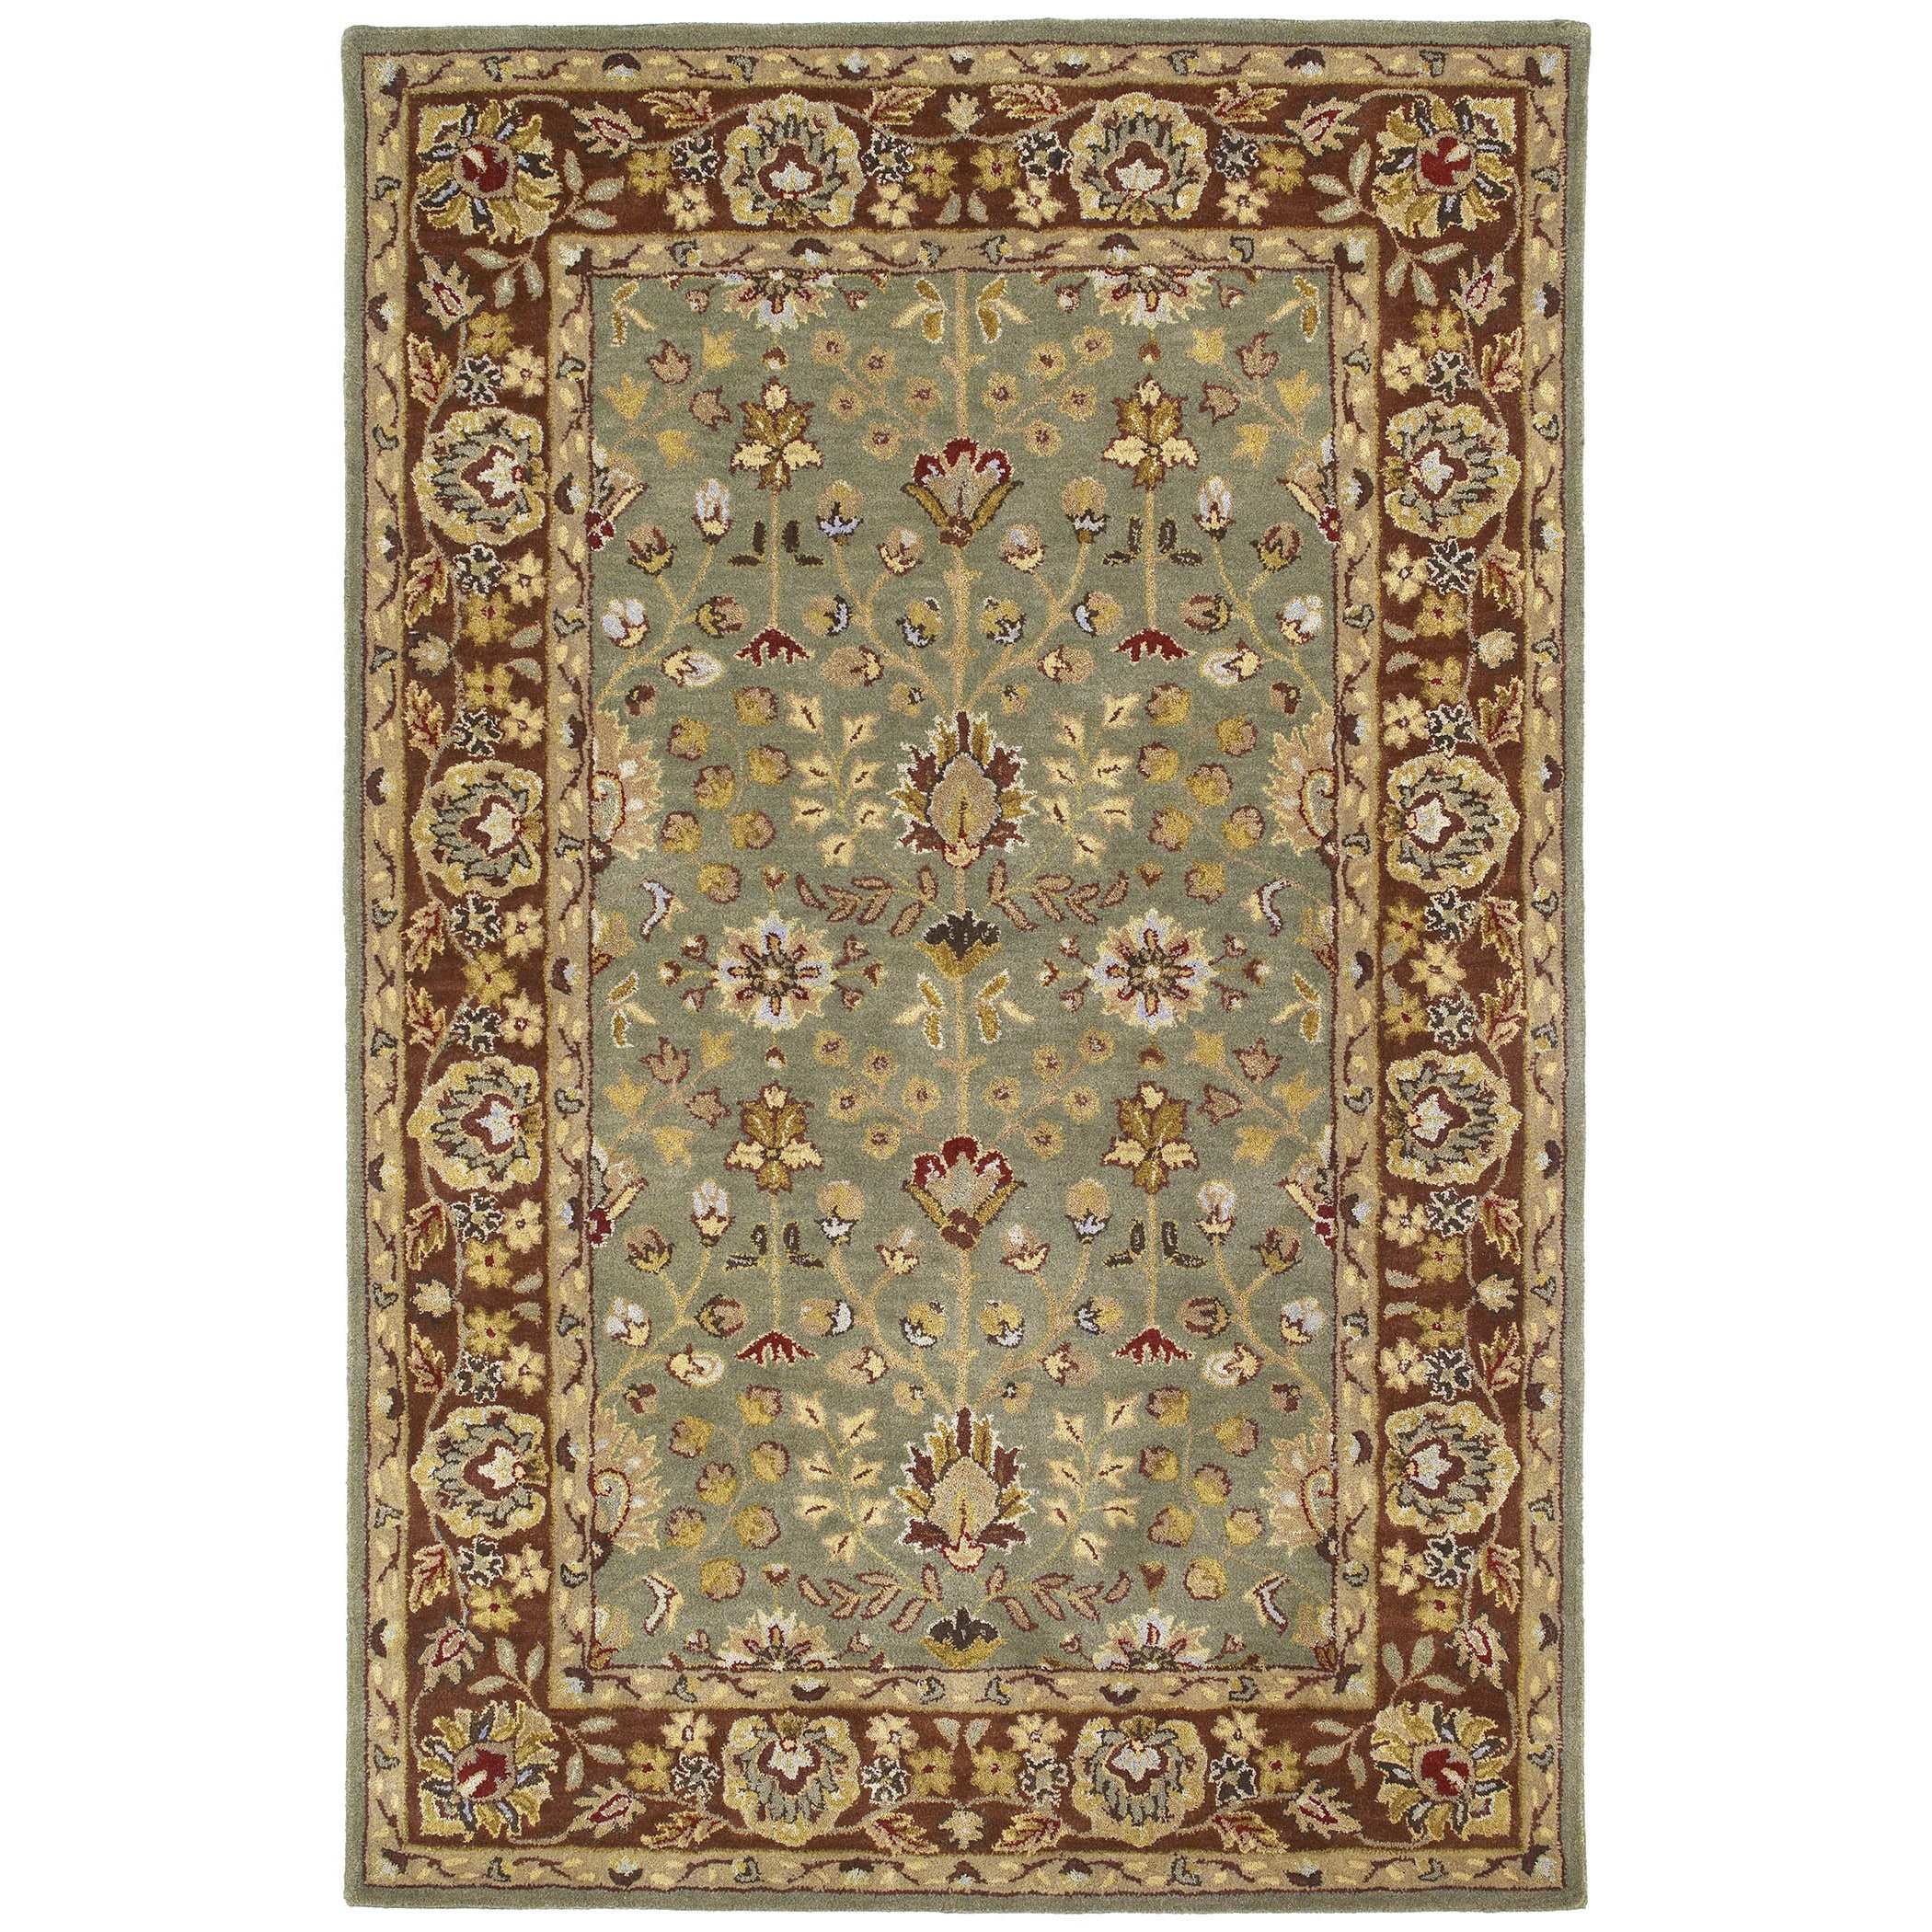 Anabelle Hand tufted Olive Green Wool Rug (2 X 3)